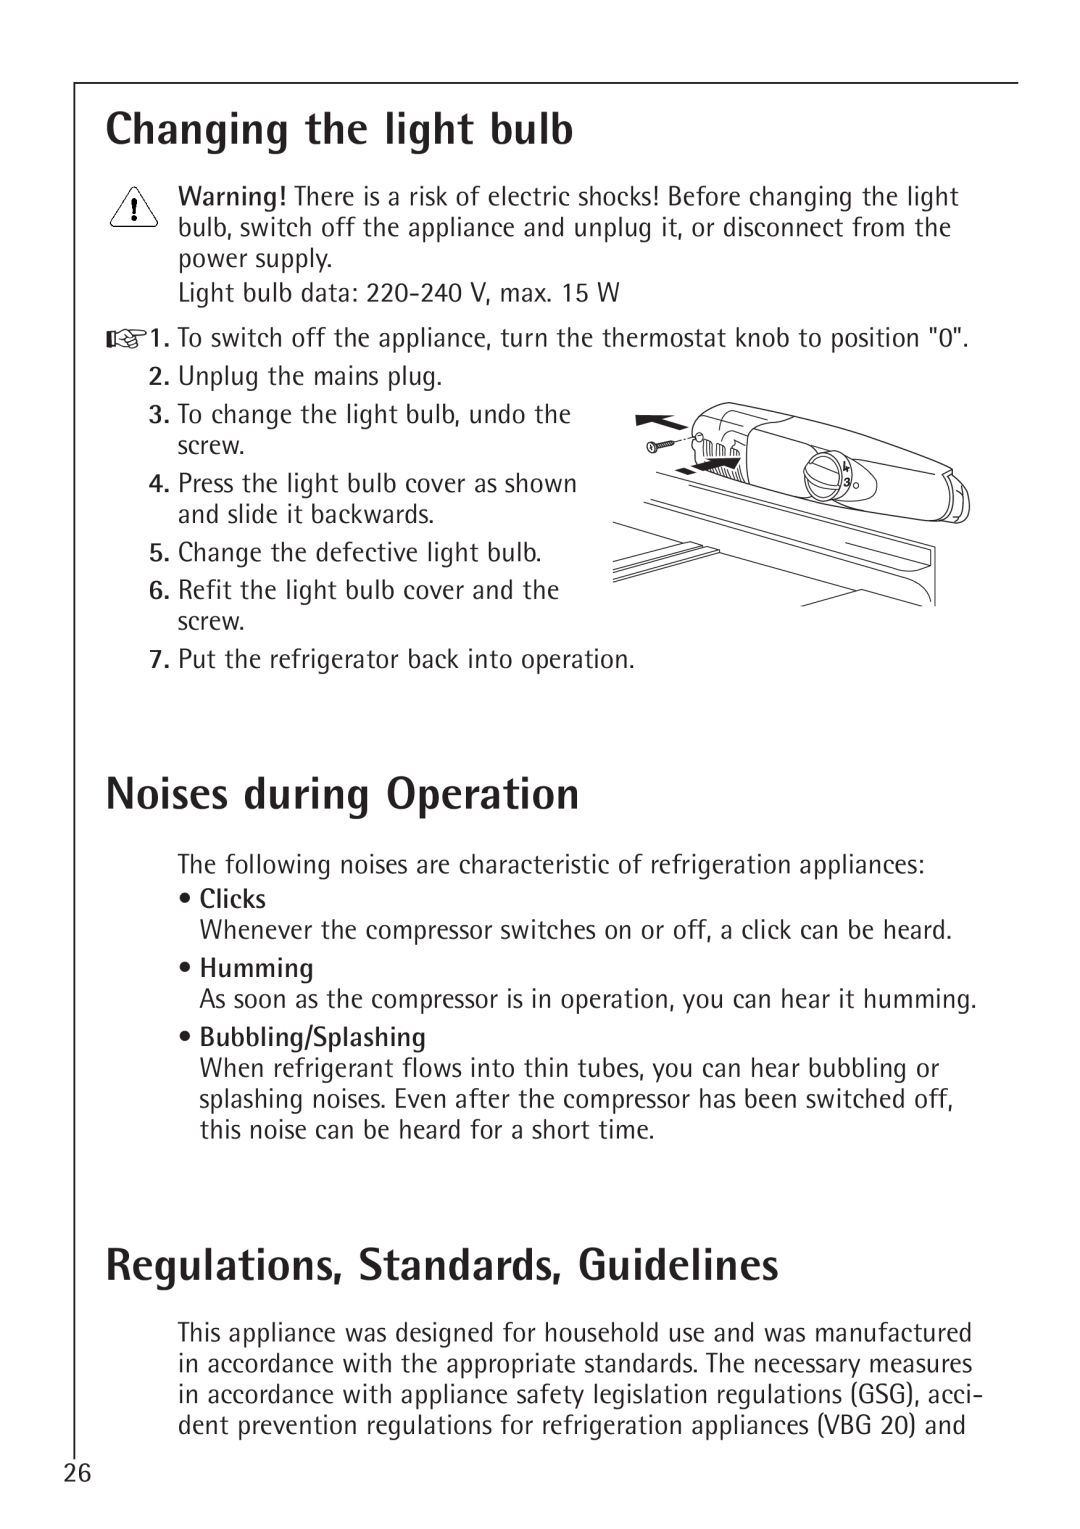 Electrolux U 86000-4 Changing the light bulb, Noises during Operation, Regulations, Standards, Guidelines, Clicks, Humming 